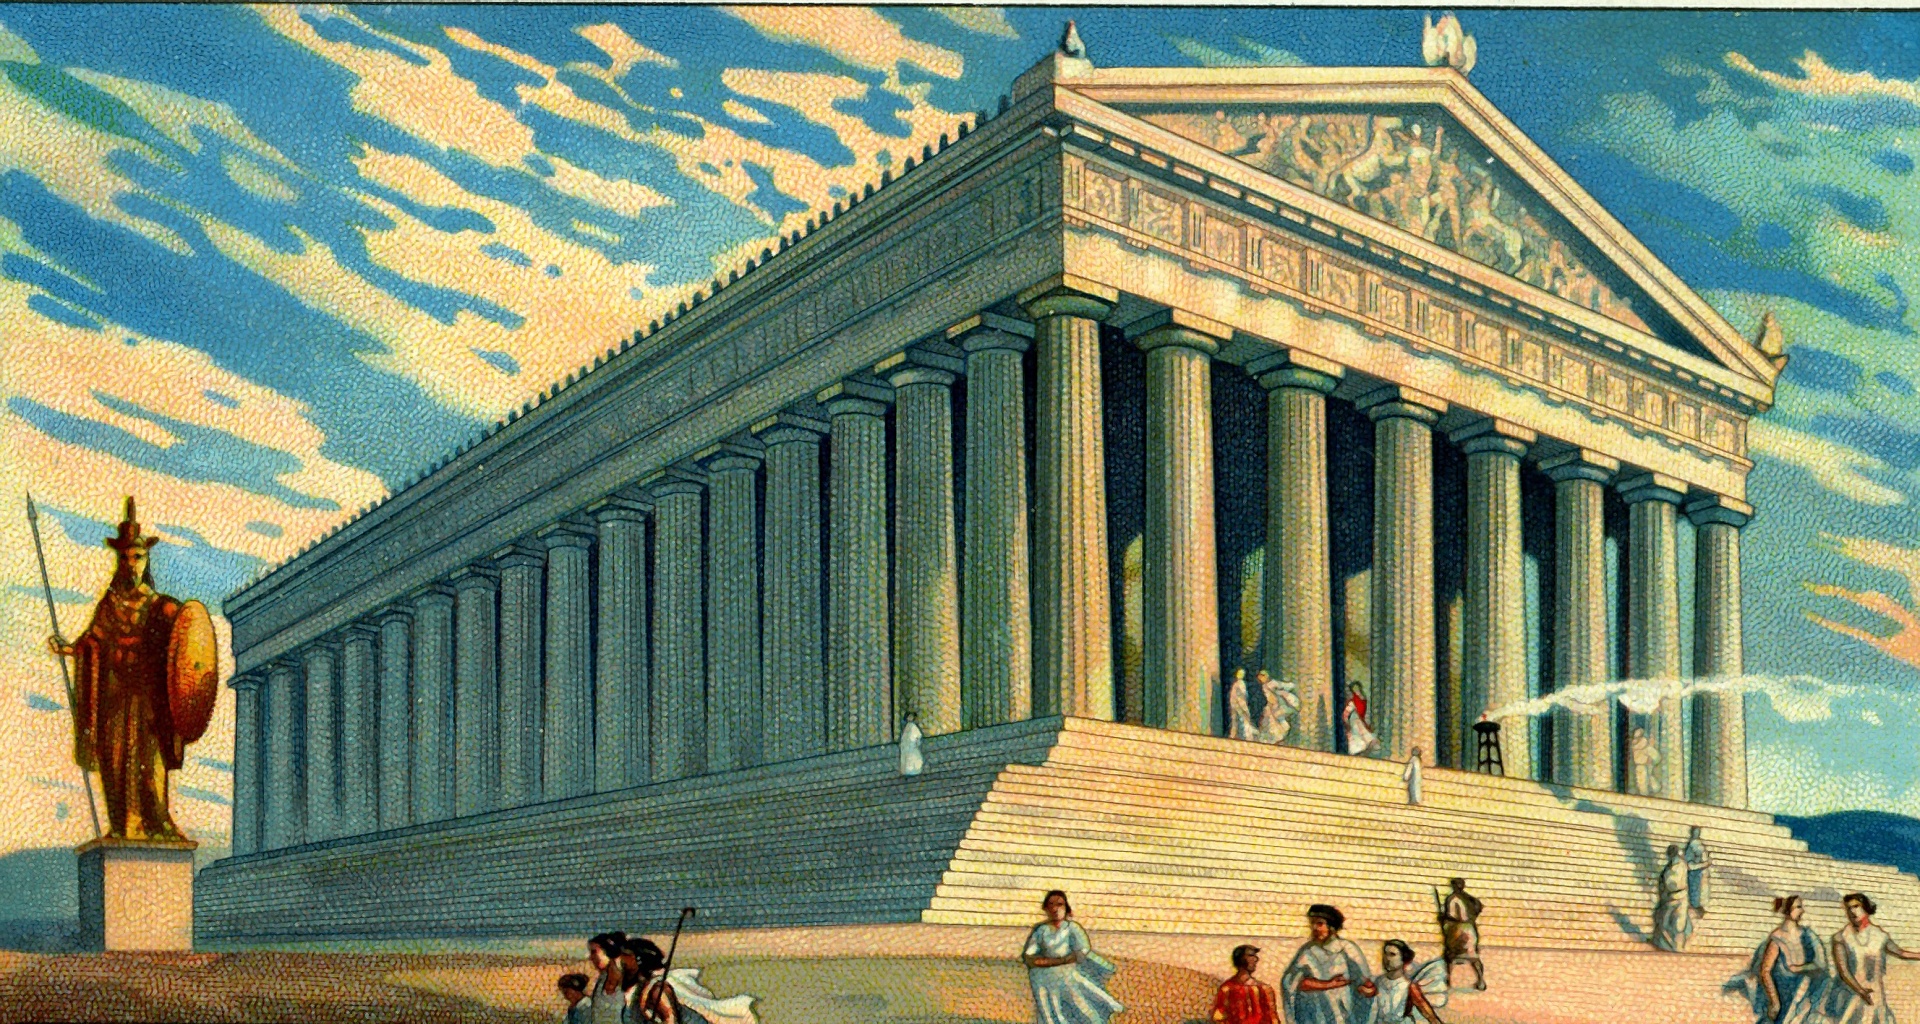 The Parthenon of Athens: Know The Ancient History Behind Greece